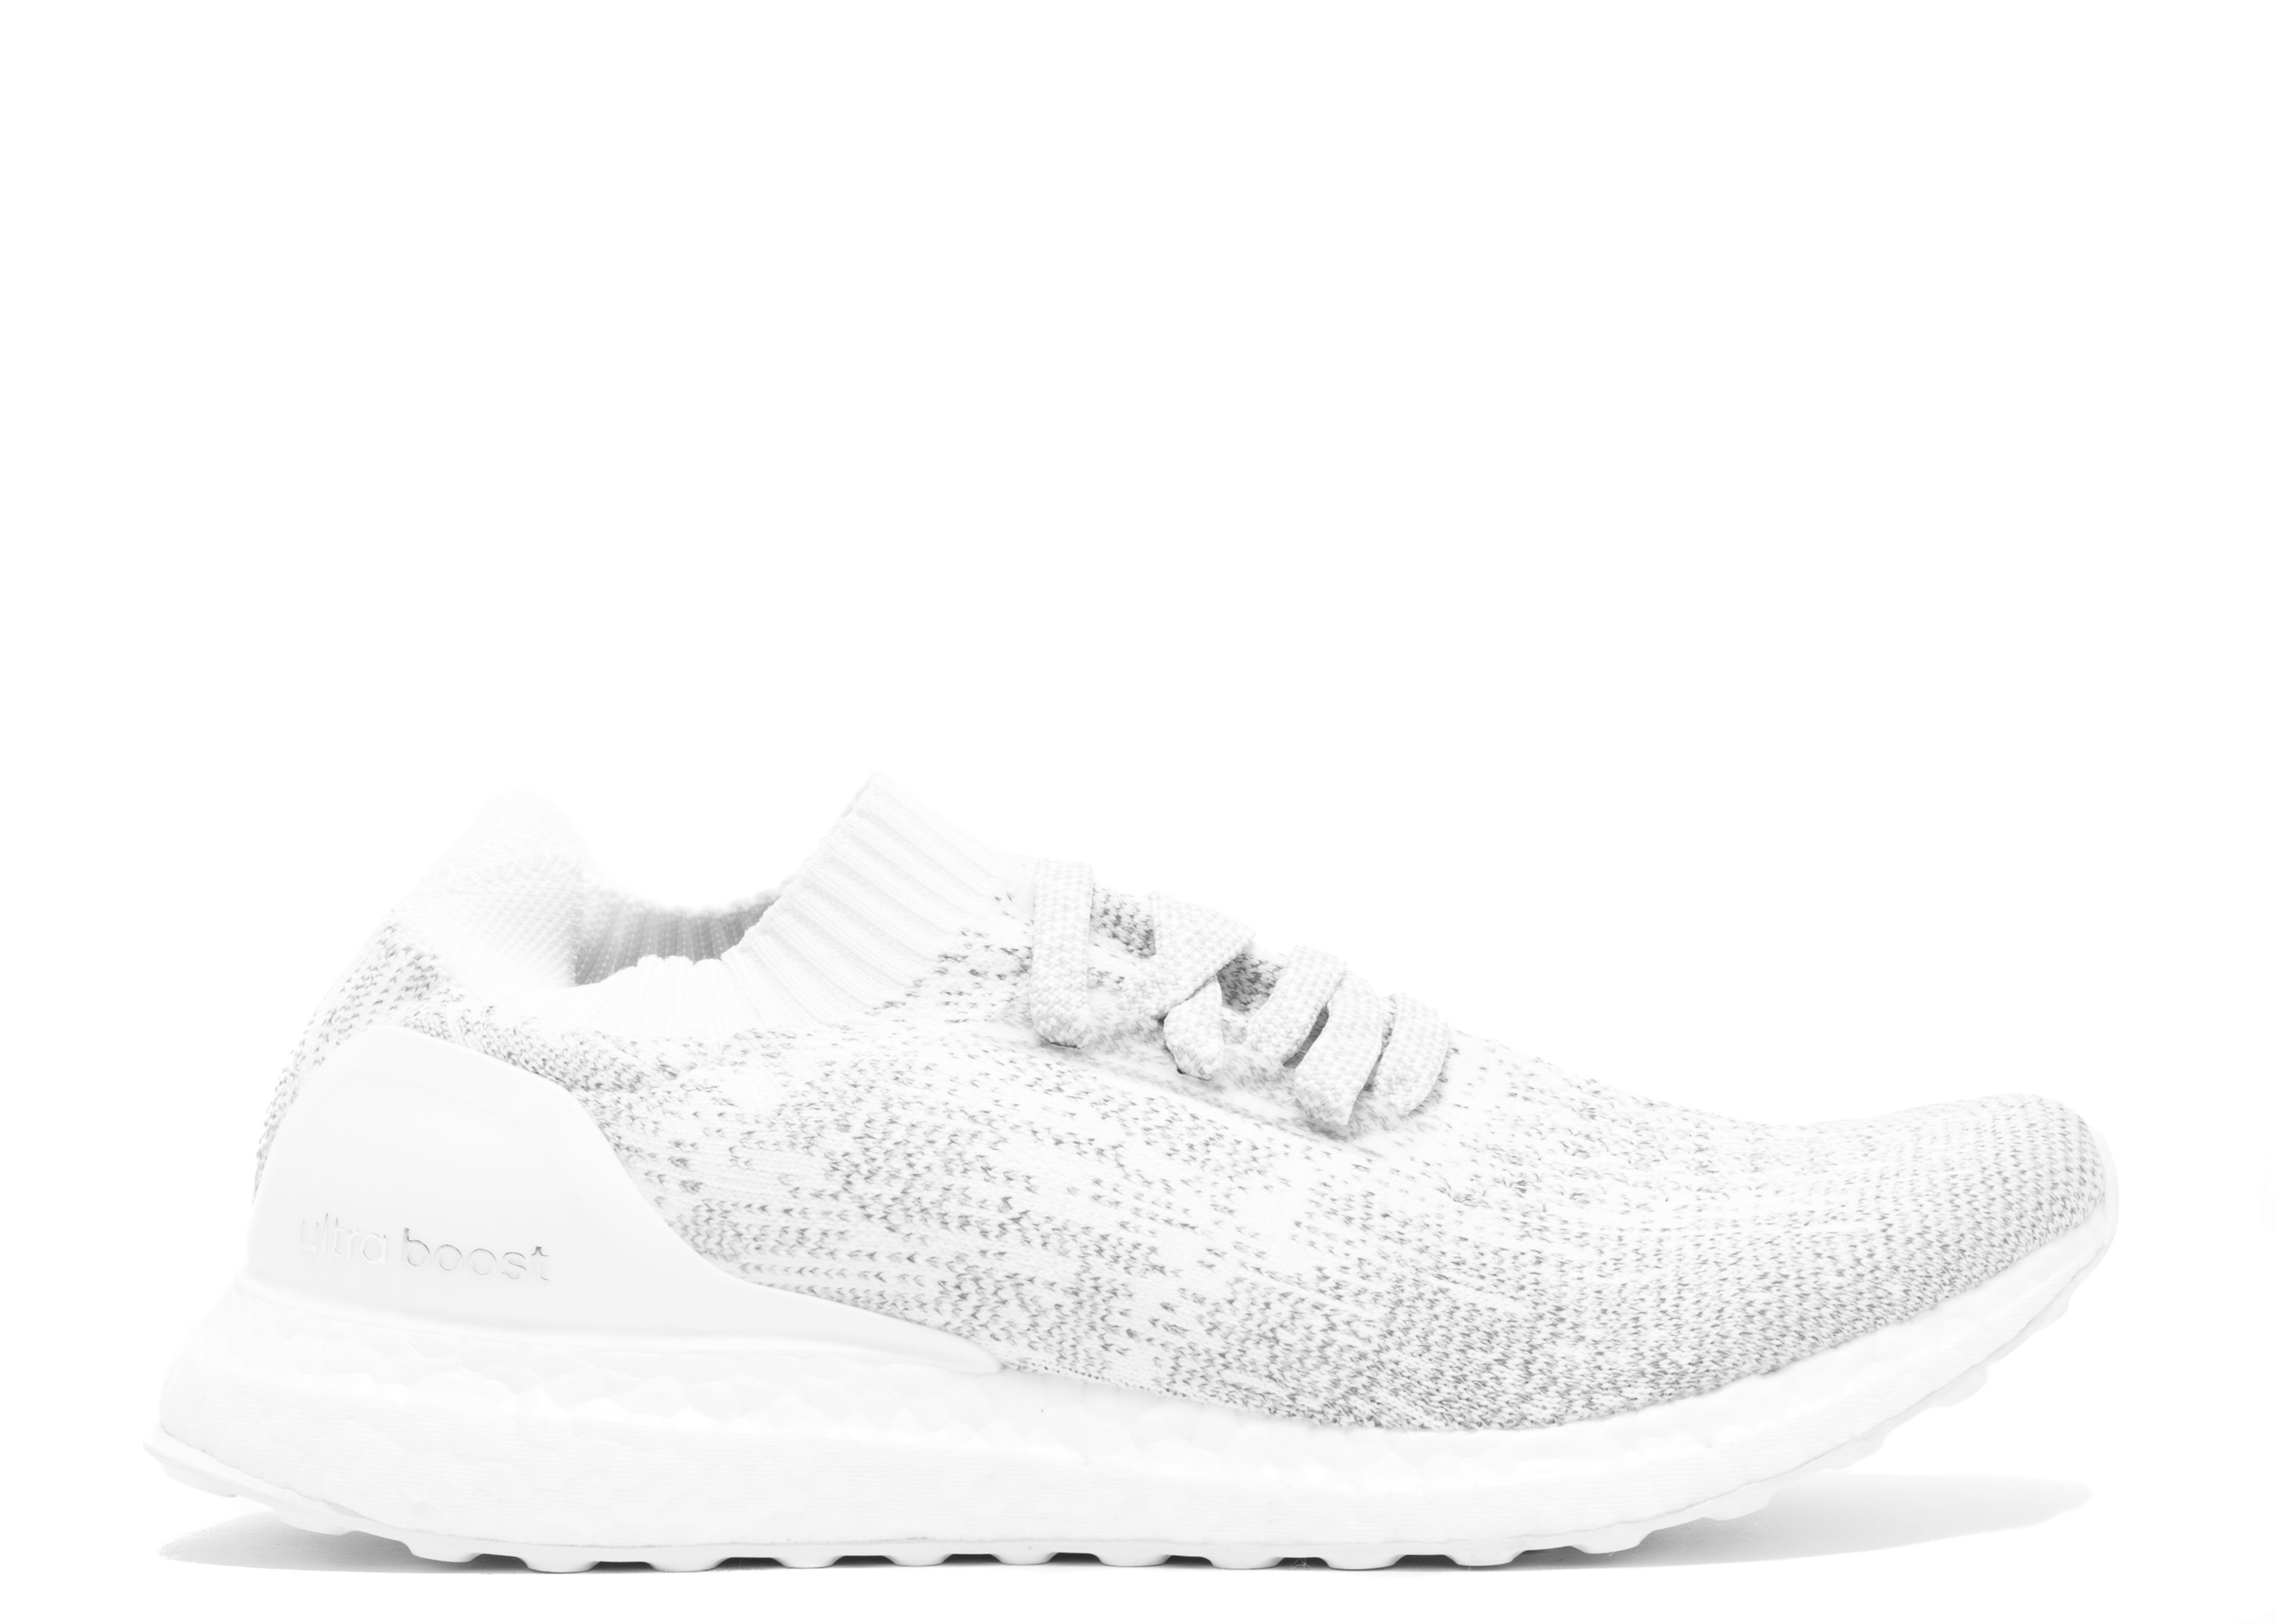 ultra boost white reflective uncaged